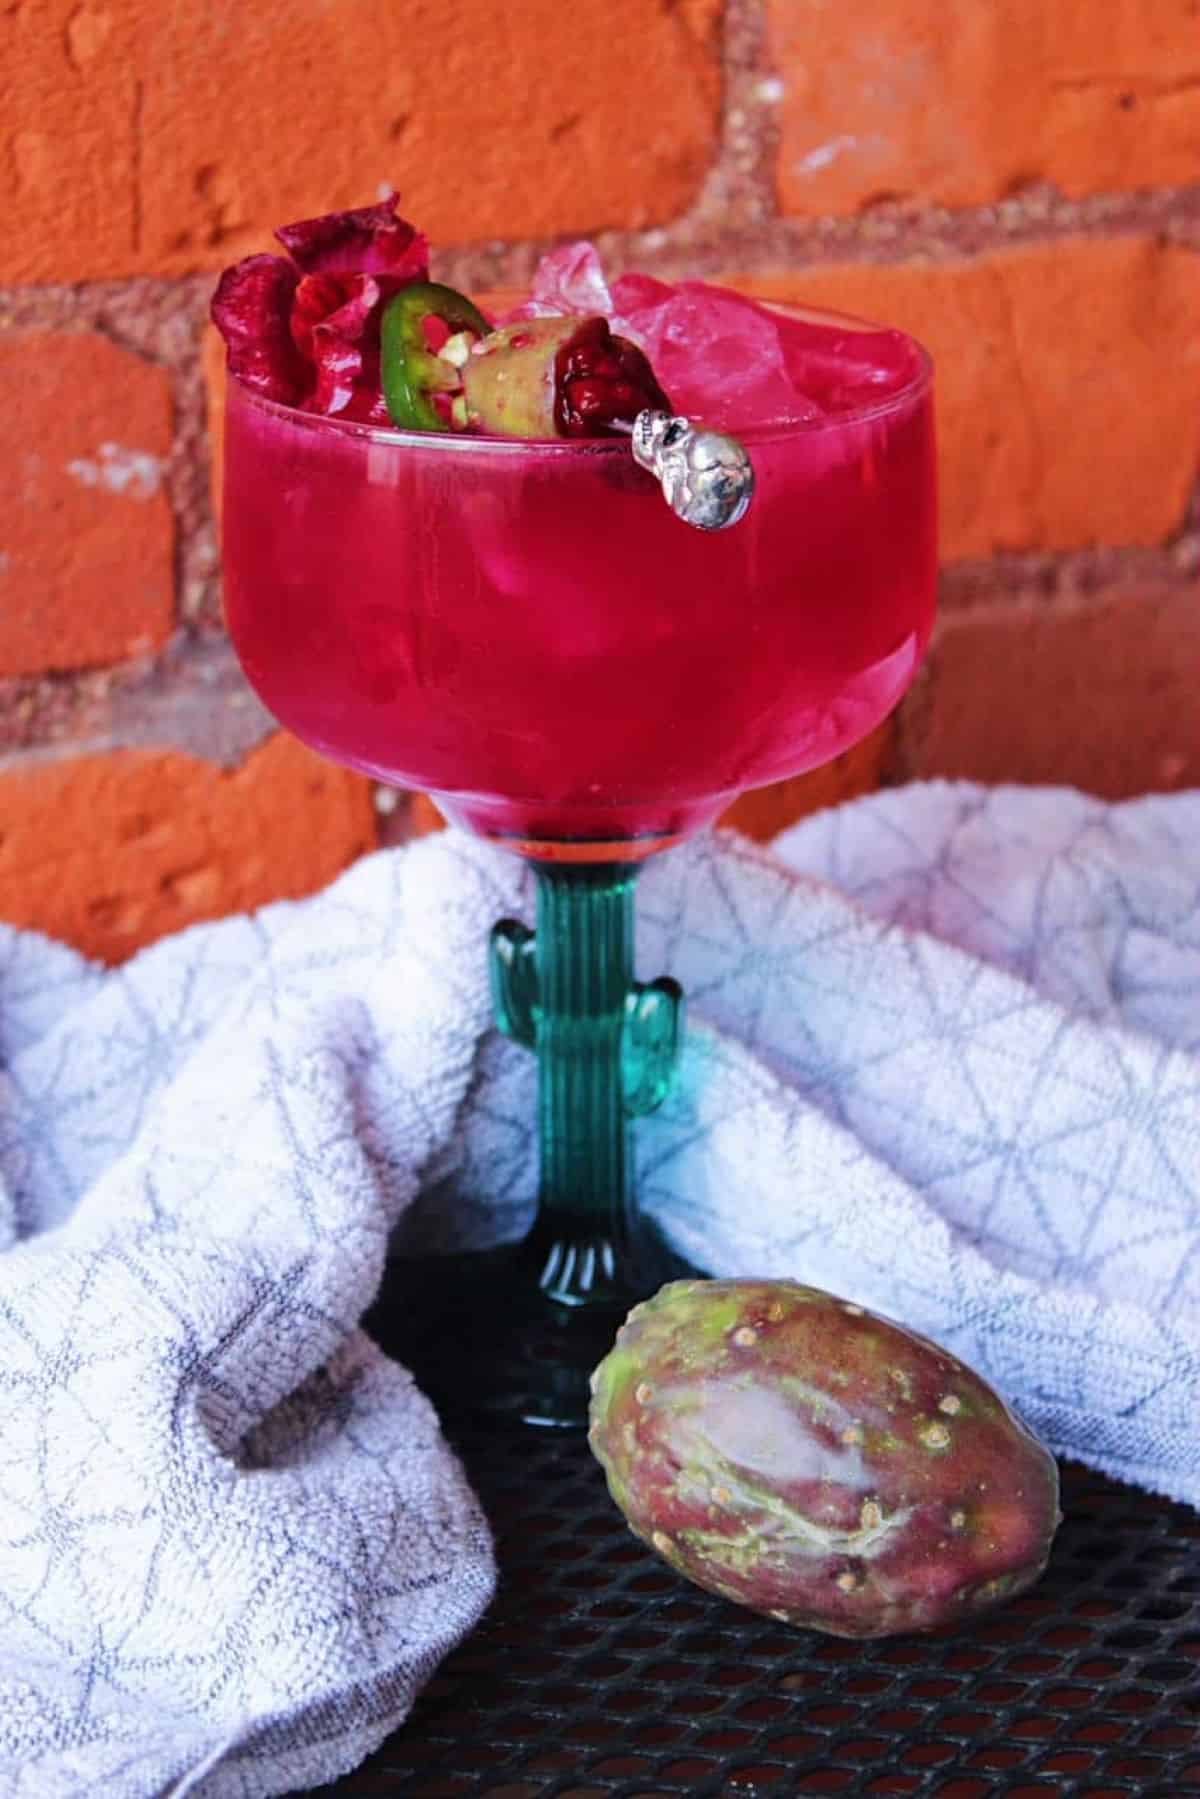 Cactus glass containing pink prickly pear margarita against brick wall.